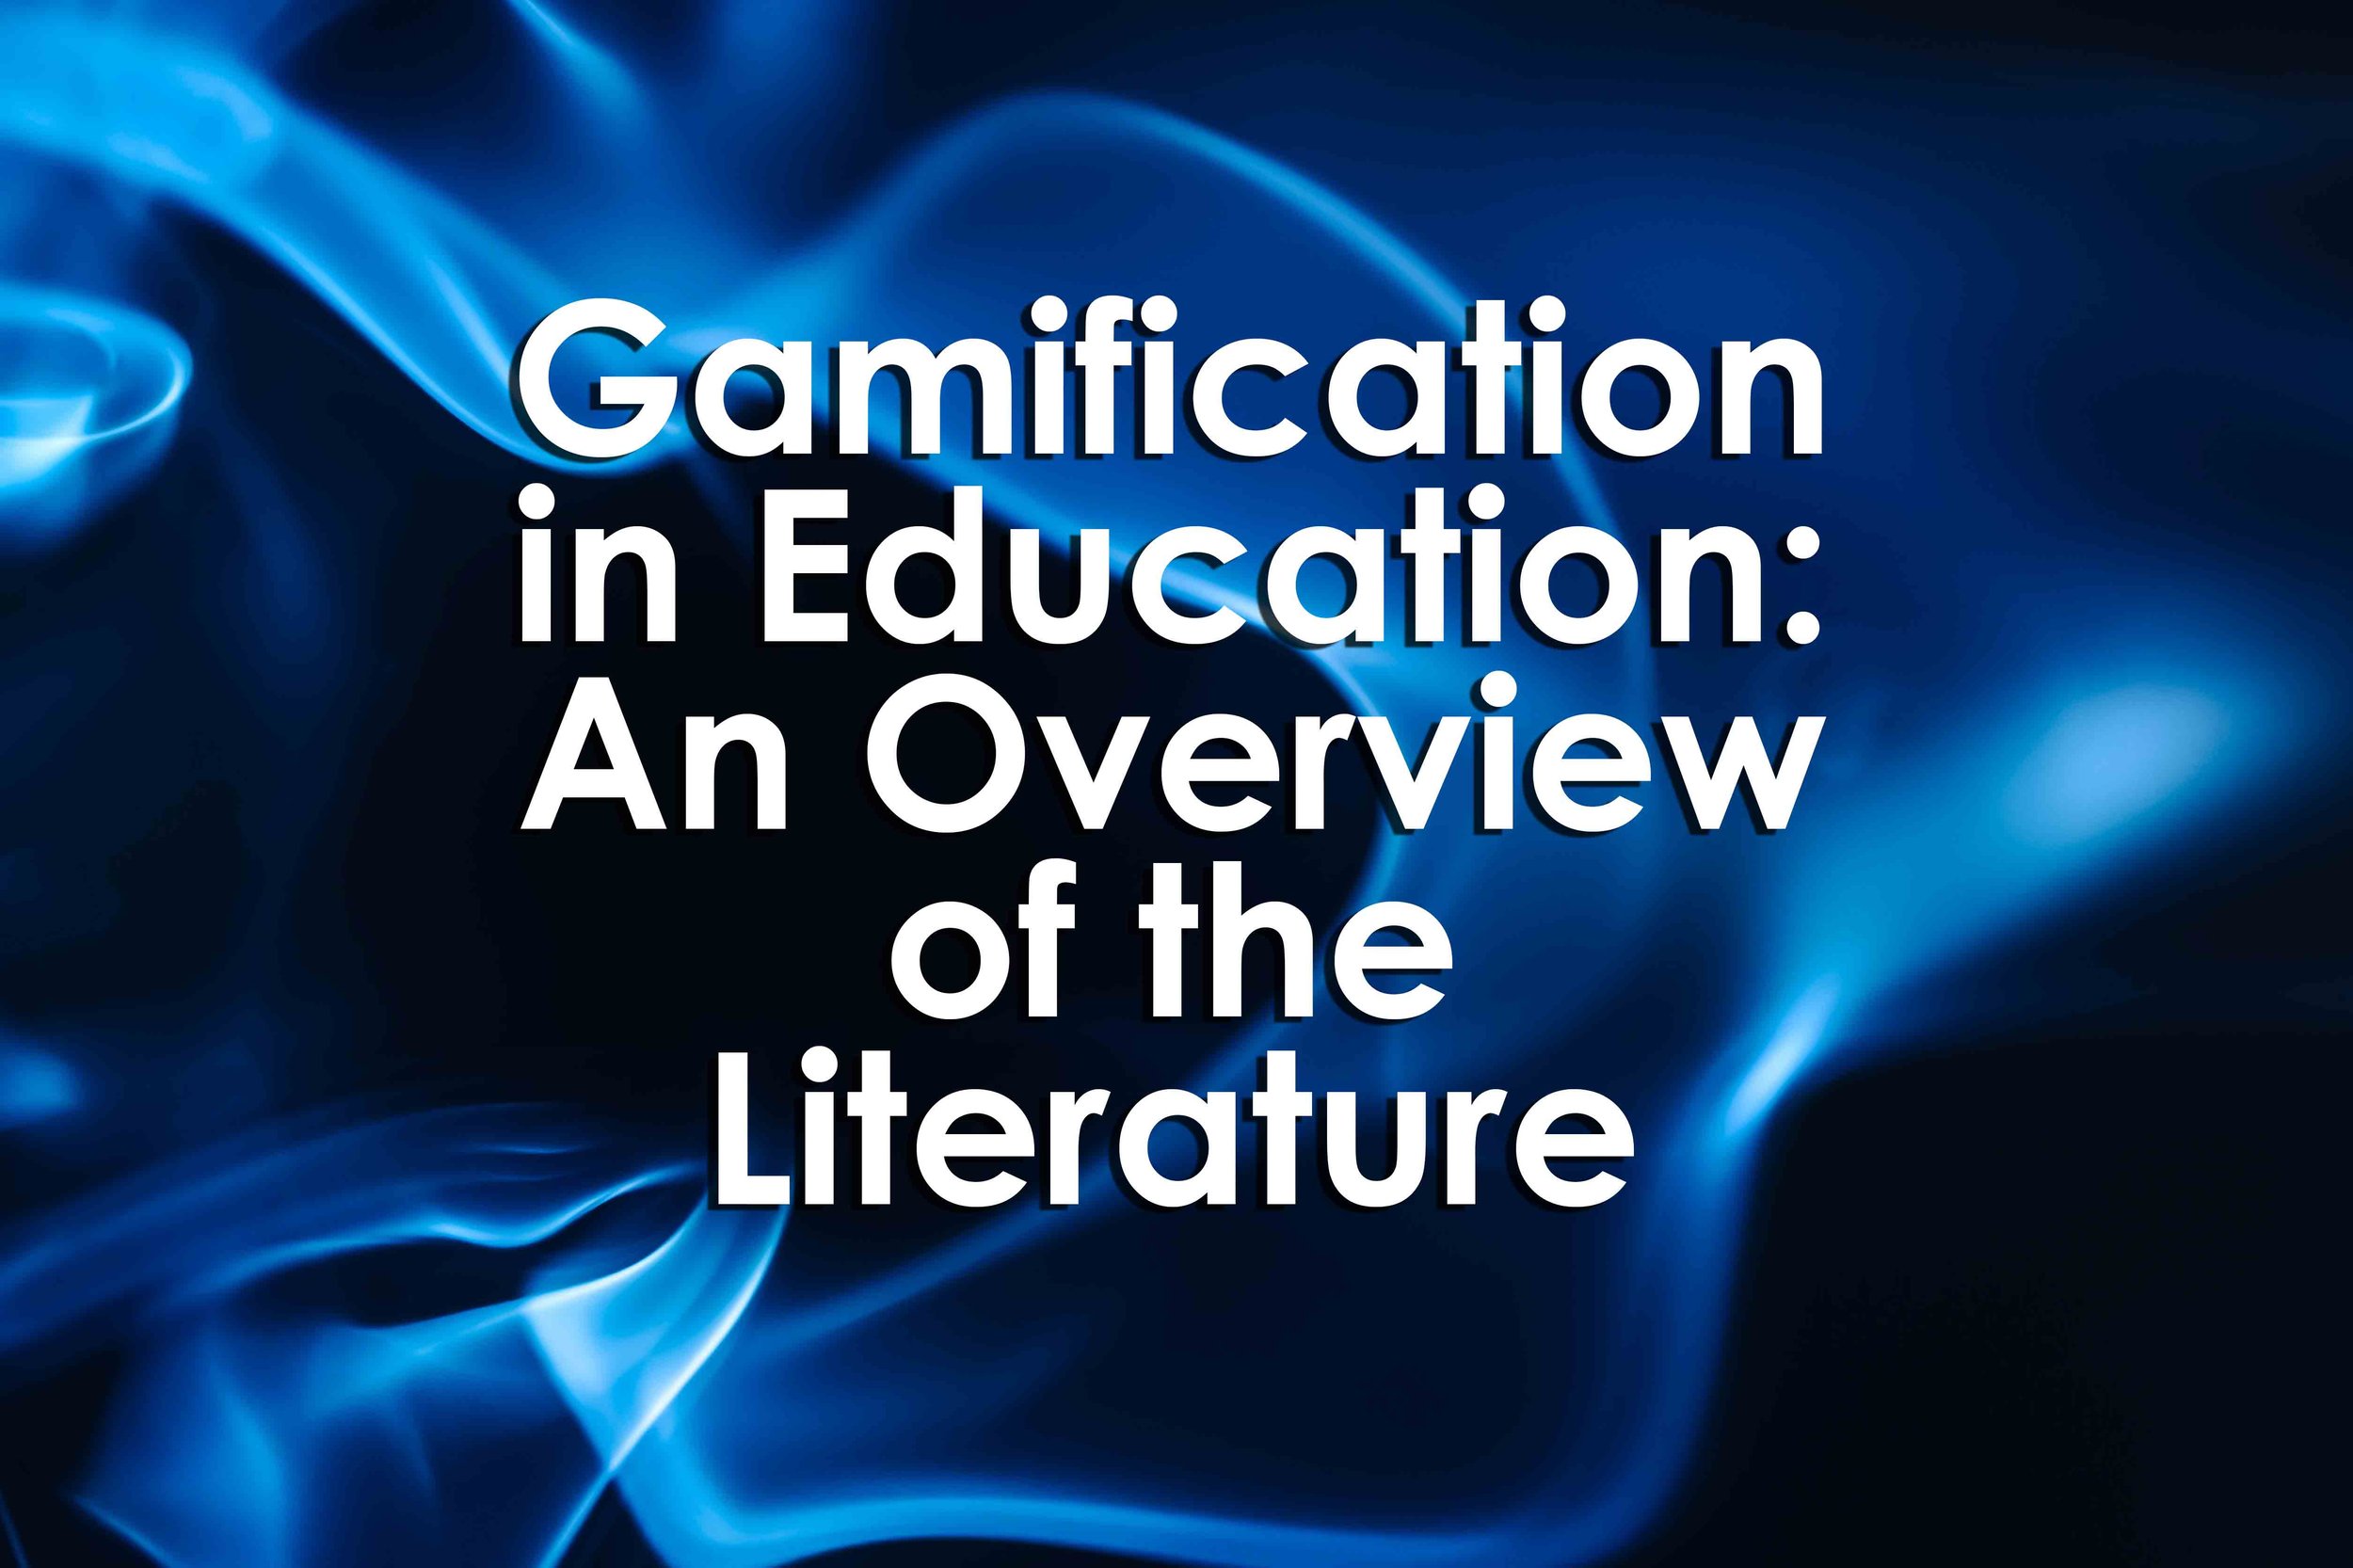 books on gamification in education